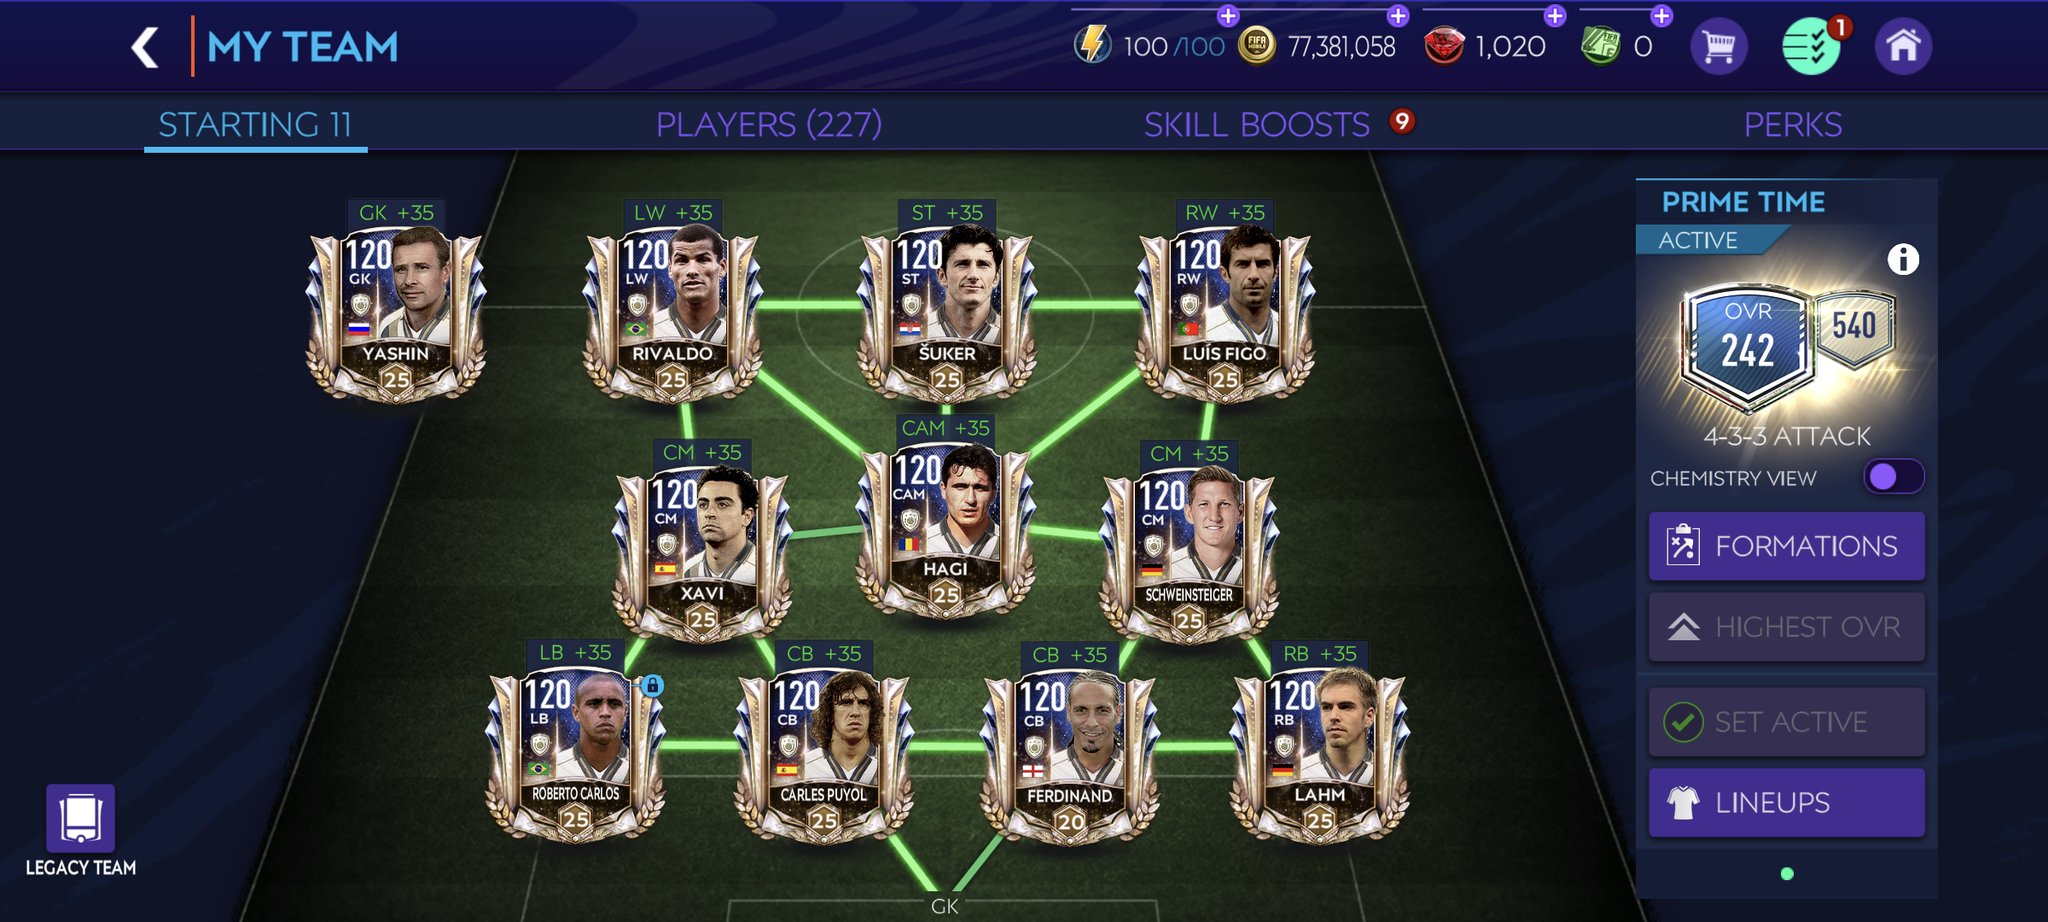 THE BEST BEGINNING!! - FIFA MOBILE R2G 